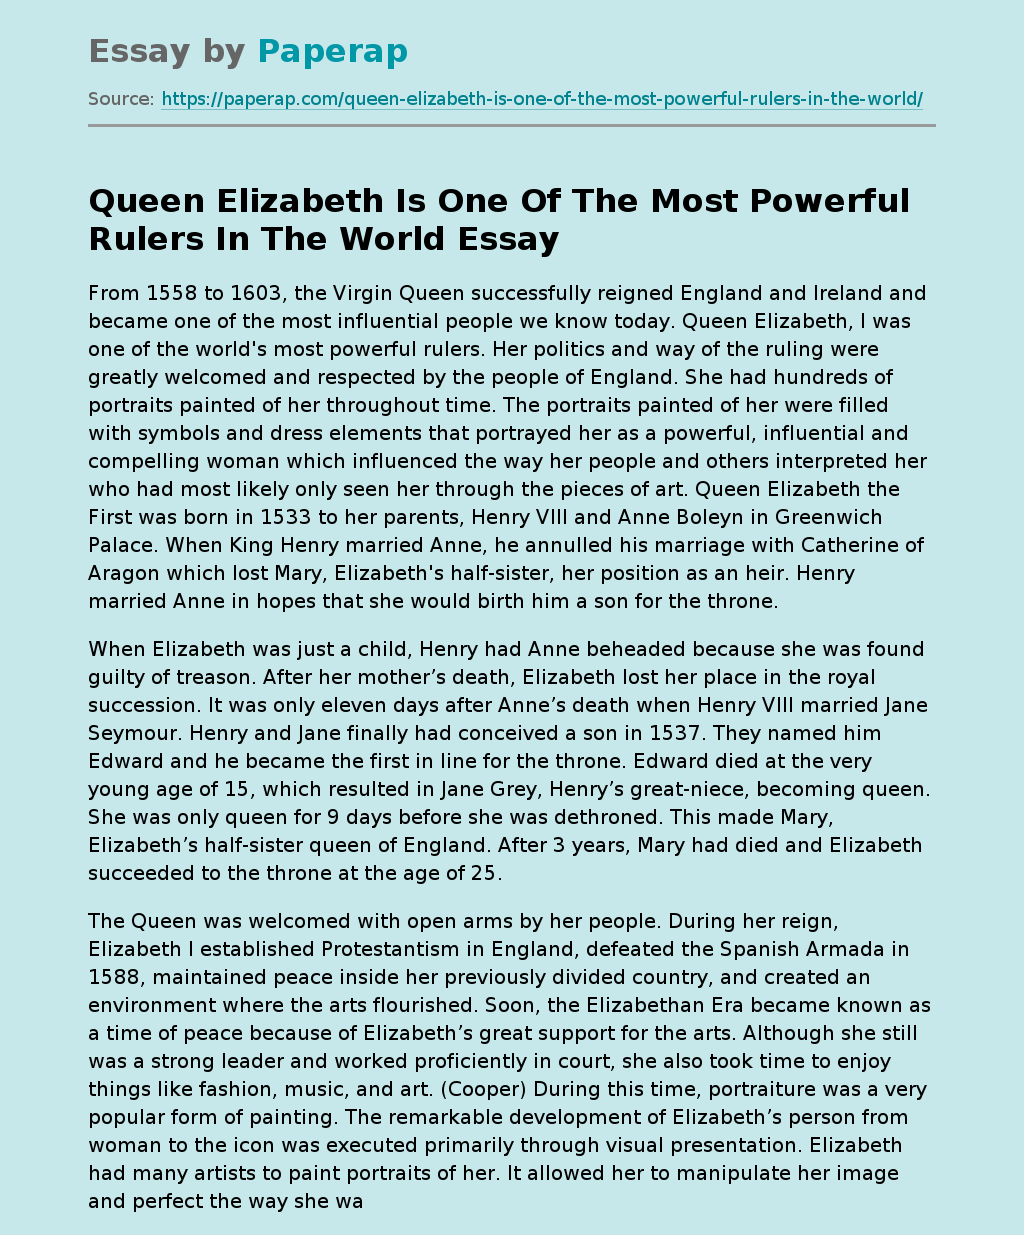 Queen Elizabeth Is One Of The Most Powerful Rulers In The World